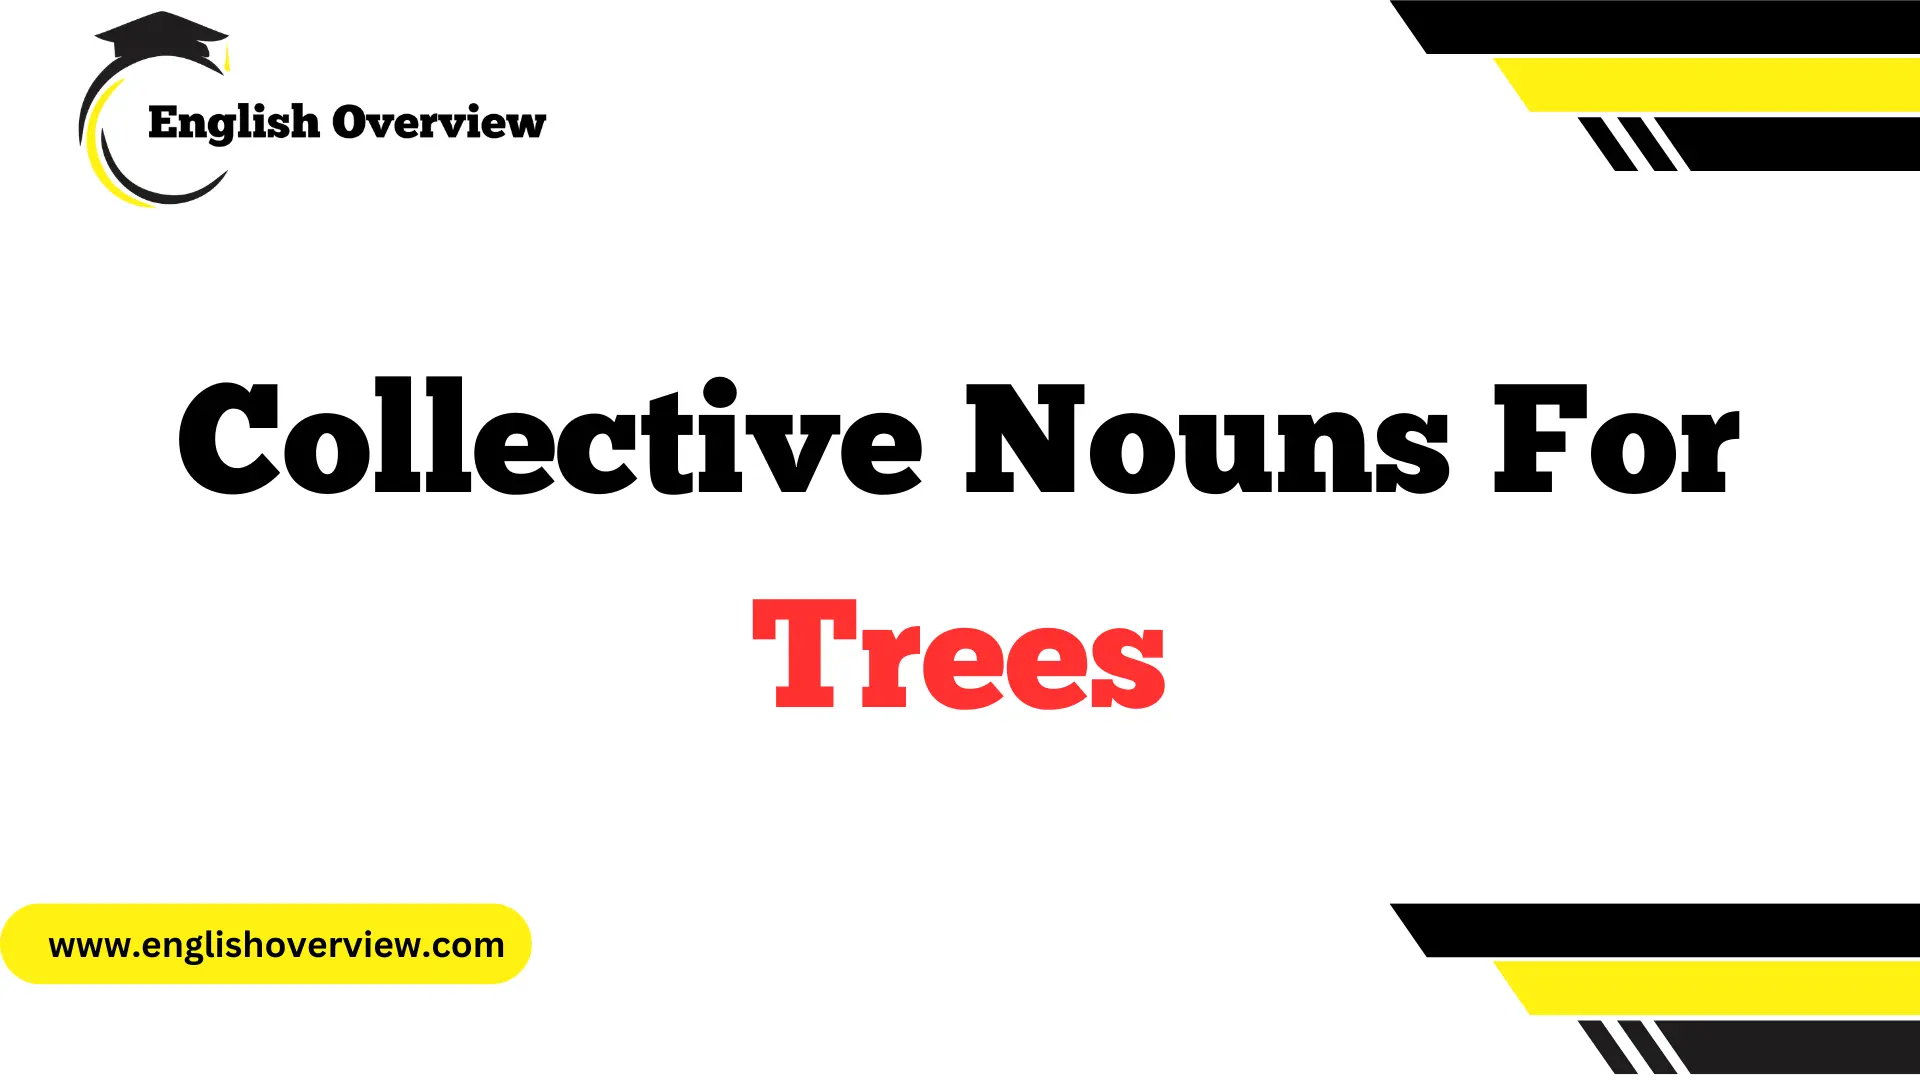 Collective Nouns For Trees